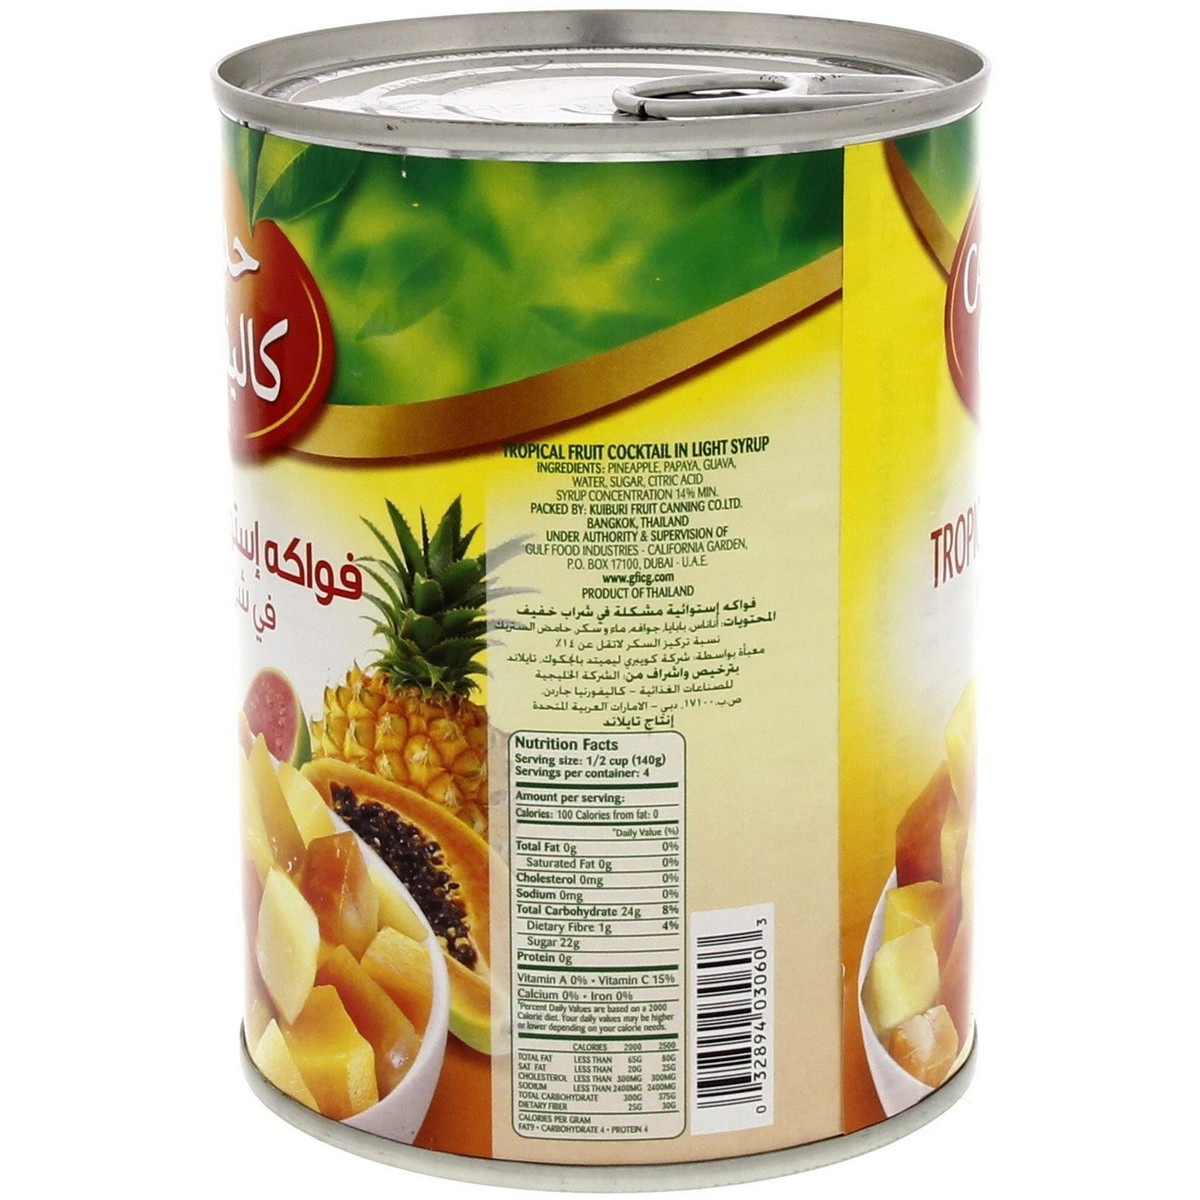 California Garden Canned Tropical Fruit Cocktail In Light Syrup 565g